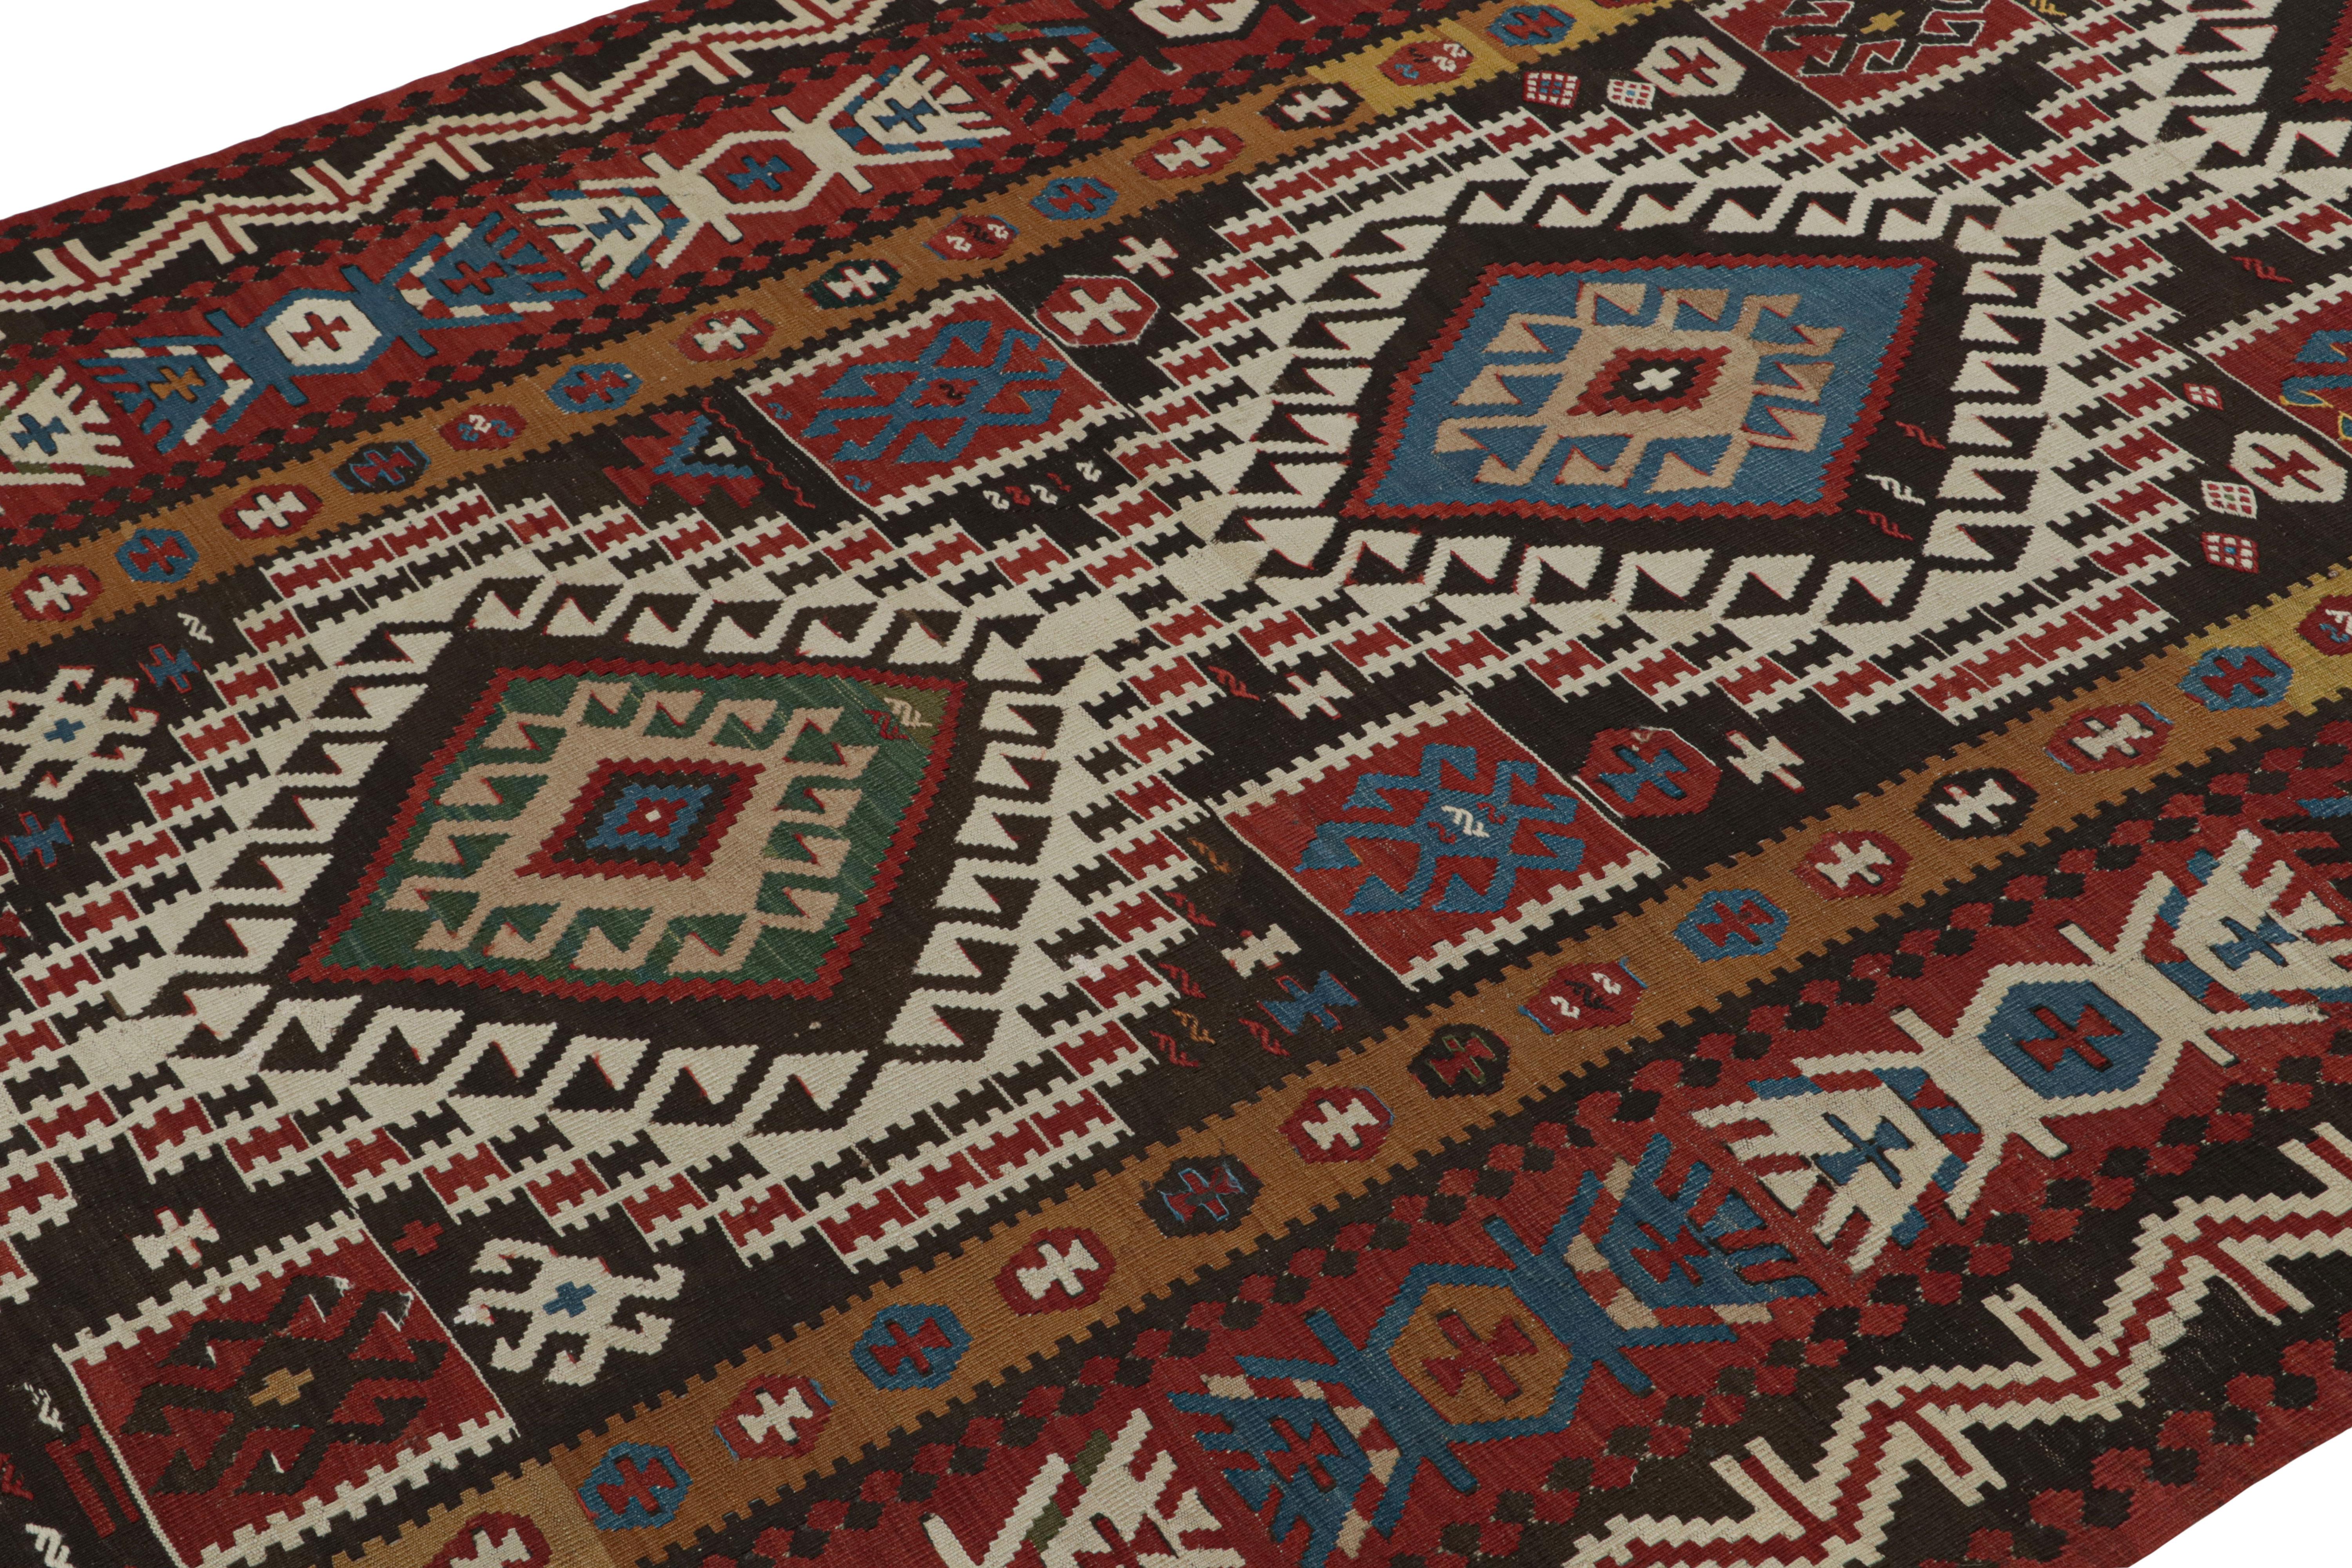 Handwoven in Turkey originating between 1950-1960, this vintage midcentury 6’ x 10’ wool Kilim features a design remniscent of the Surakhani region of neighboring Azerbaijan, enjoying an acclaimed traditional tribal geometric diamond pattern with